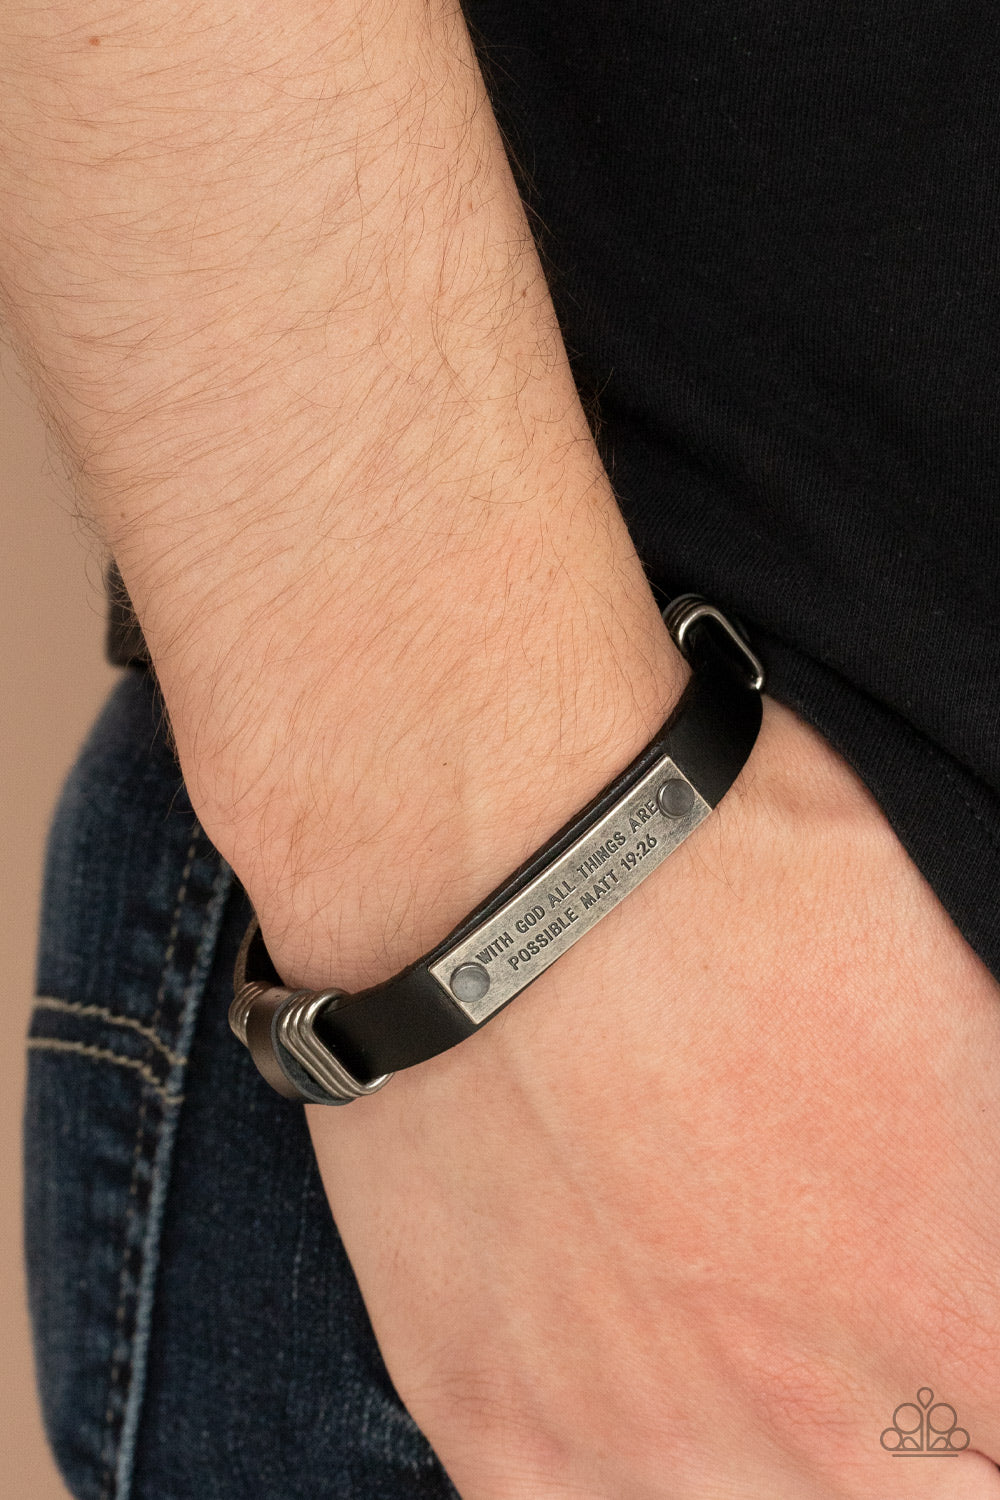 Make It Possible Black Urban Bracelet - Paparazzi Accessories  A silver frame is stamped in the bible passage, "With God all things are possible, Matt 19:26," is studded in place across the front of a black leather band, gunmetal rings are added to the display for a rustic finish. Features an adjustable snap closure.  All Paparazzi Accessories are lead free and nickel free!  Sold as one individual bracelet.